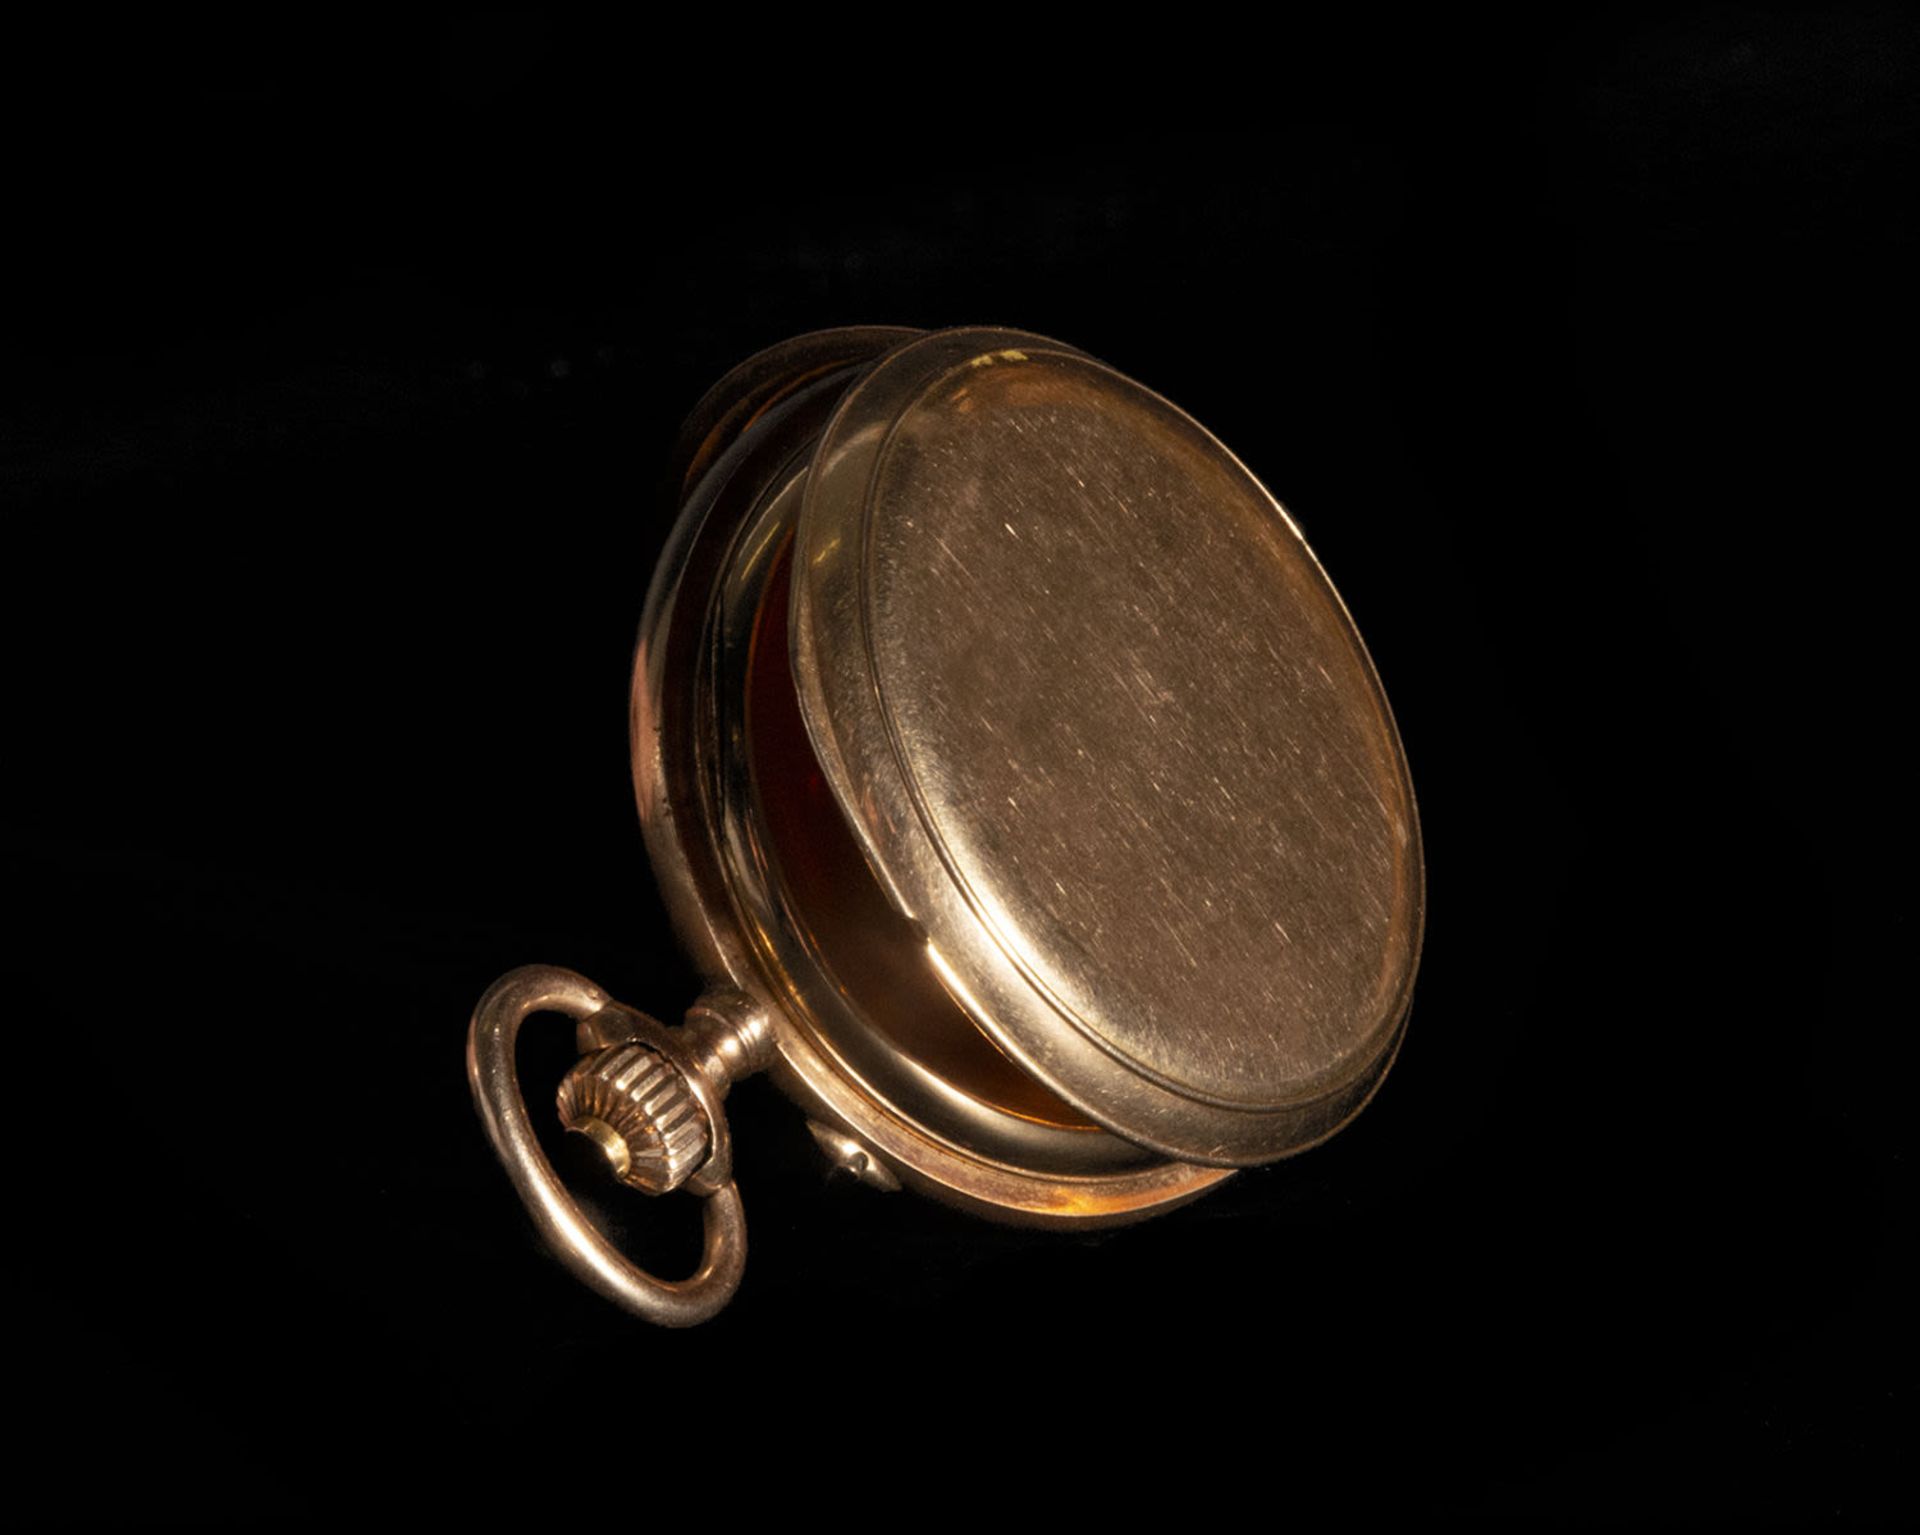 Elegant Paul Buhre/Faber Type pocket watch with 14k gold case from the year 1910-1911, .583 hallmark - Image 2 of 4